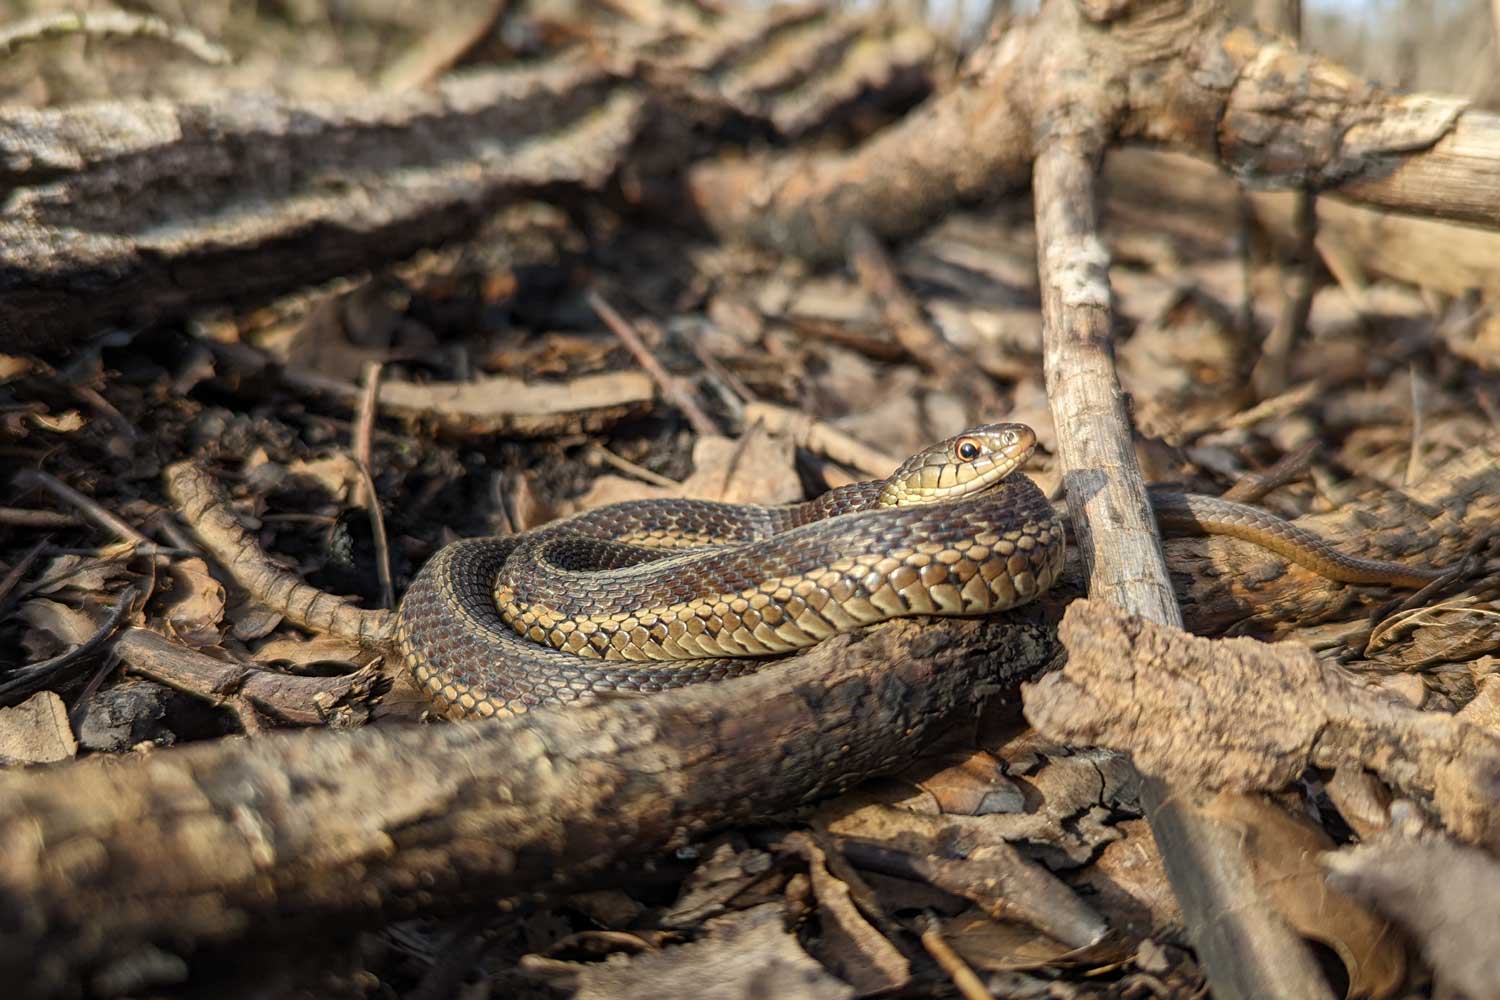 A garter snaked coiled on the ground blending in with its surroundings of fallen branches, logs, sticks and leaves.